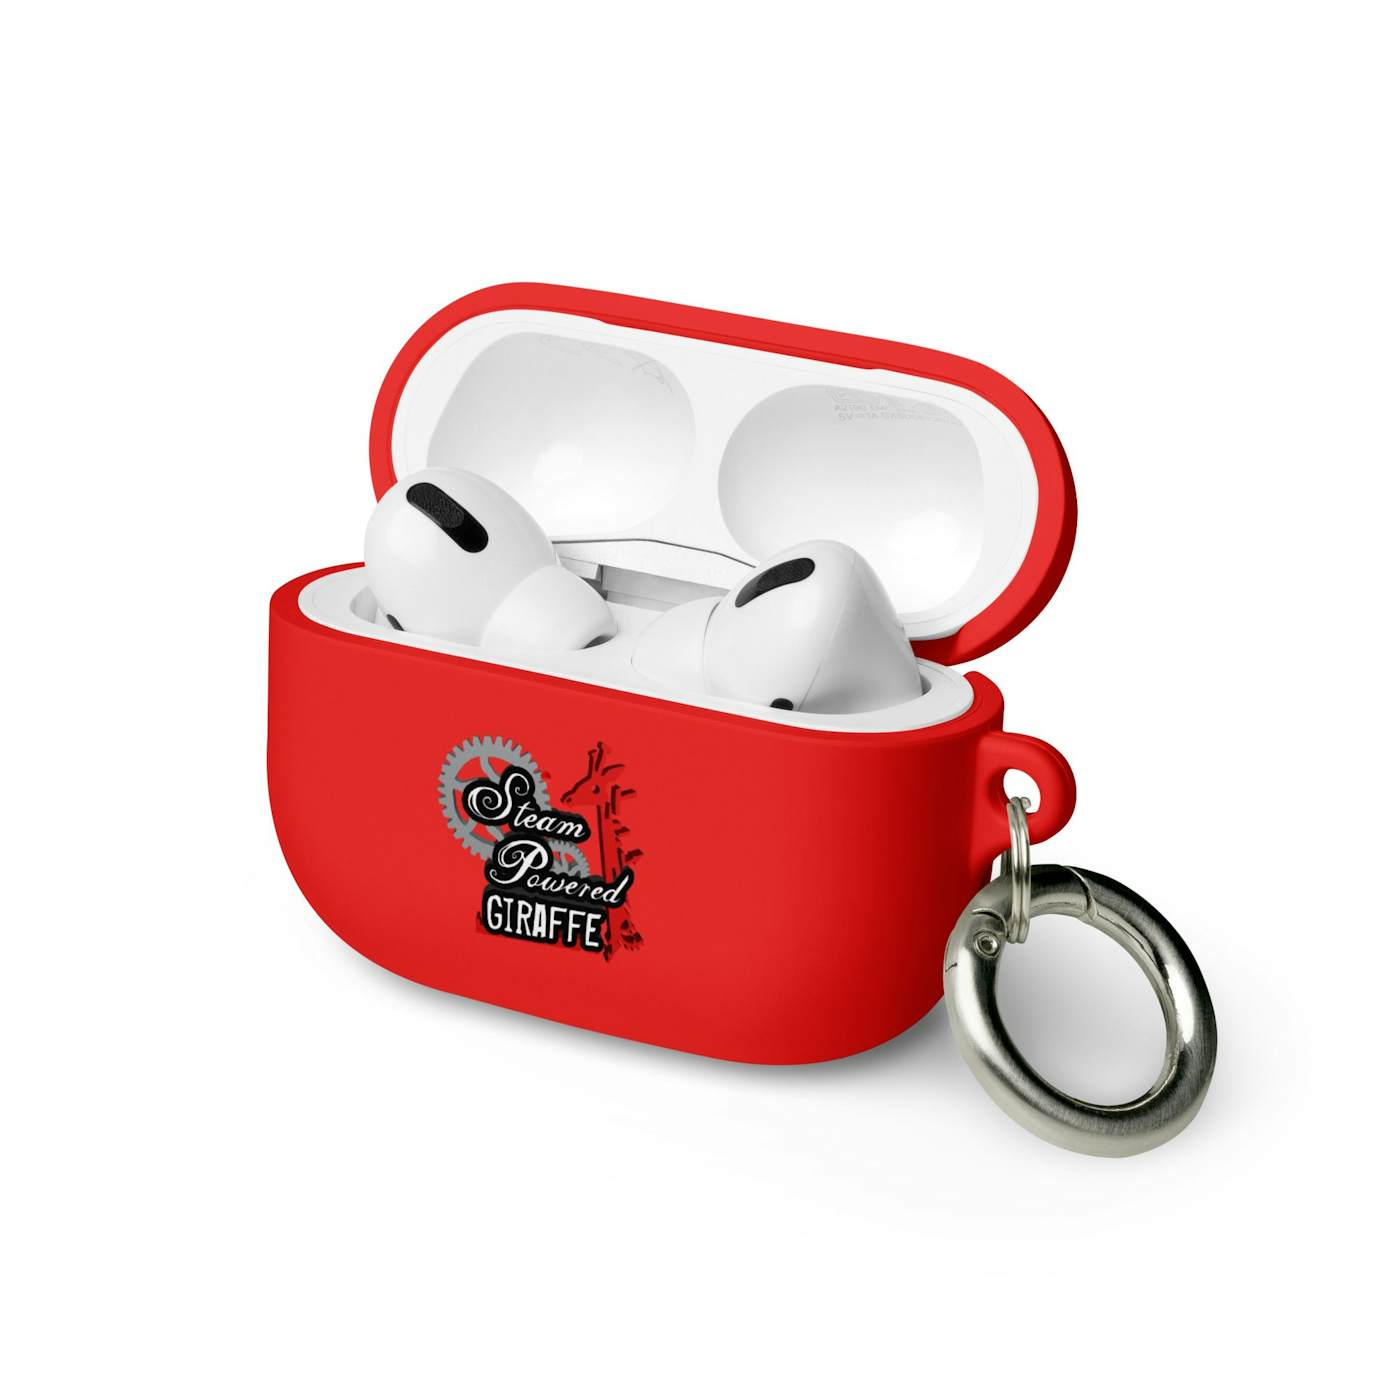 https://merchbar.imgix.net/product/475/10298/8248005558503/cjE0hjNMairpods-case-red-airpods-pro-front-636eaaa10fa4c.jpg?q=40&auto=compress,format&w=1400